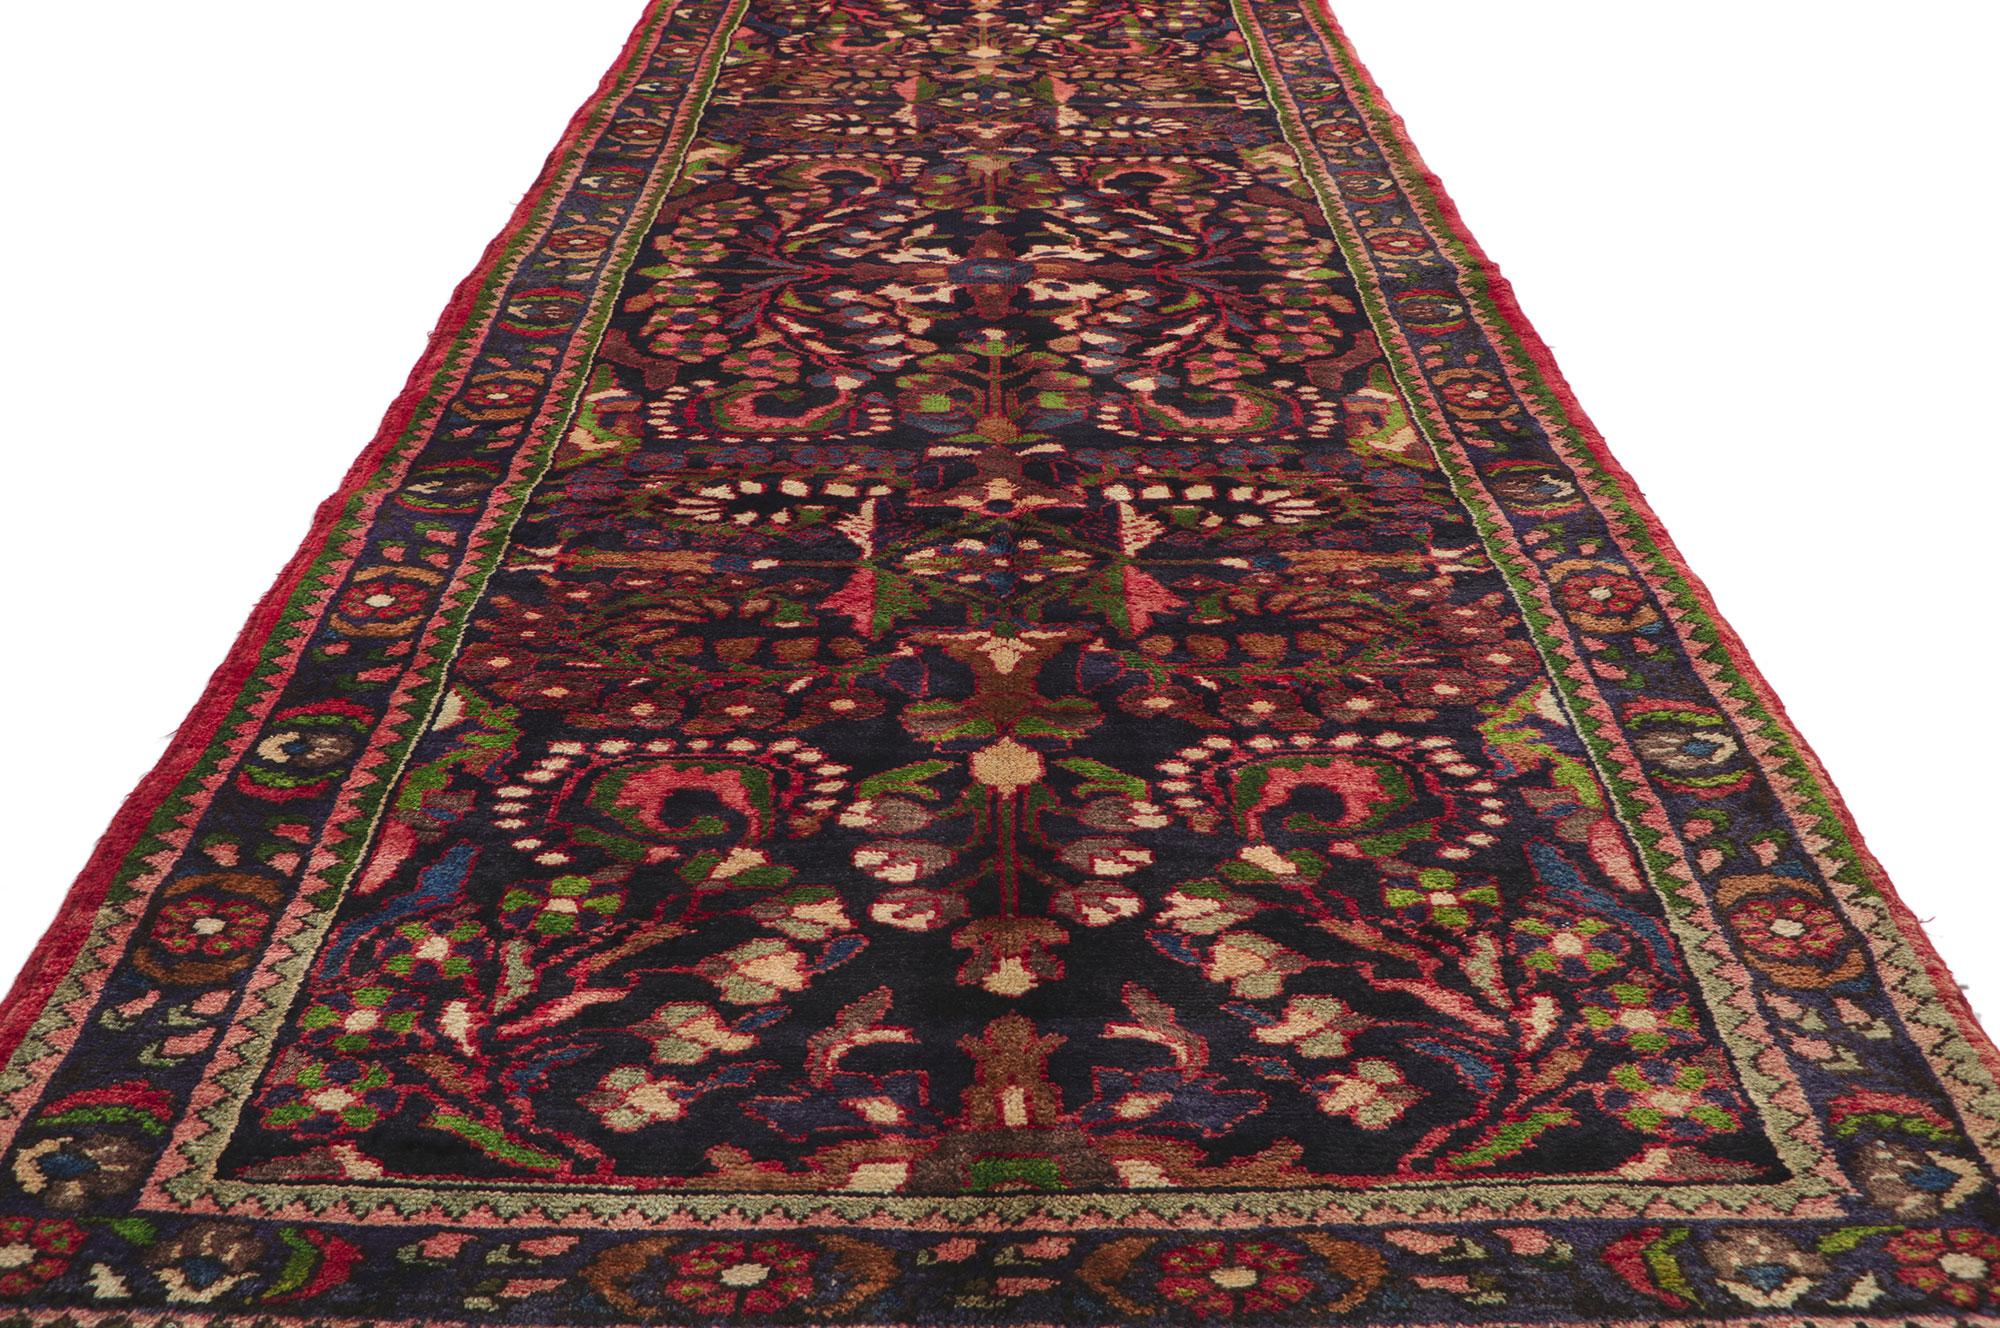 Vintage Persian Malayer Rug, Timeless Elegance Meets Whimsical Sophistication In Good Condition For Sale In Dallas, TX